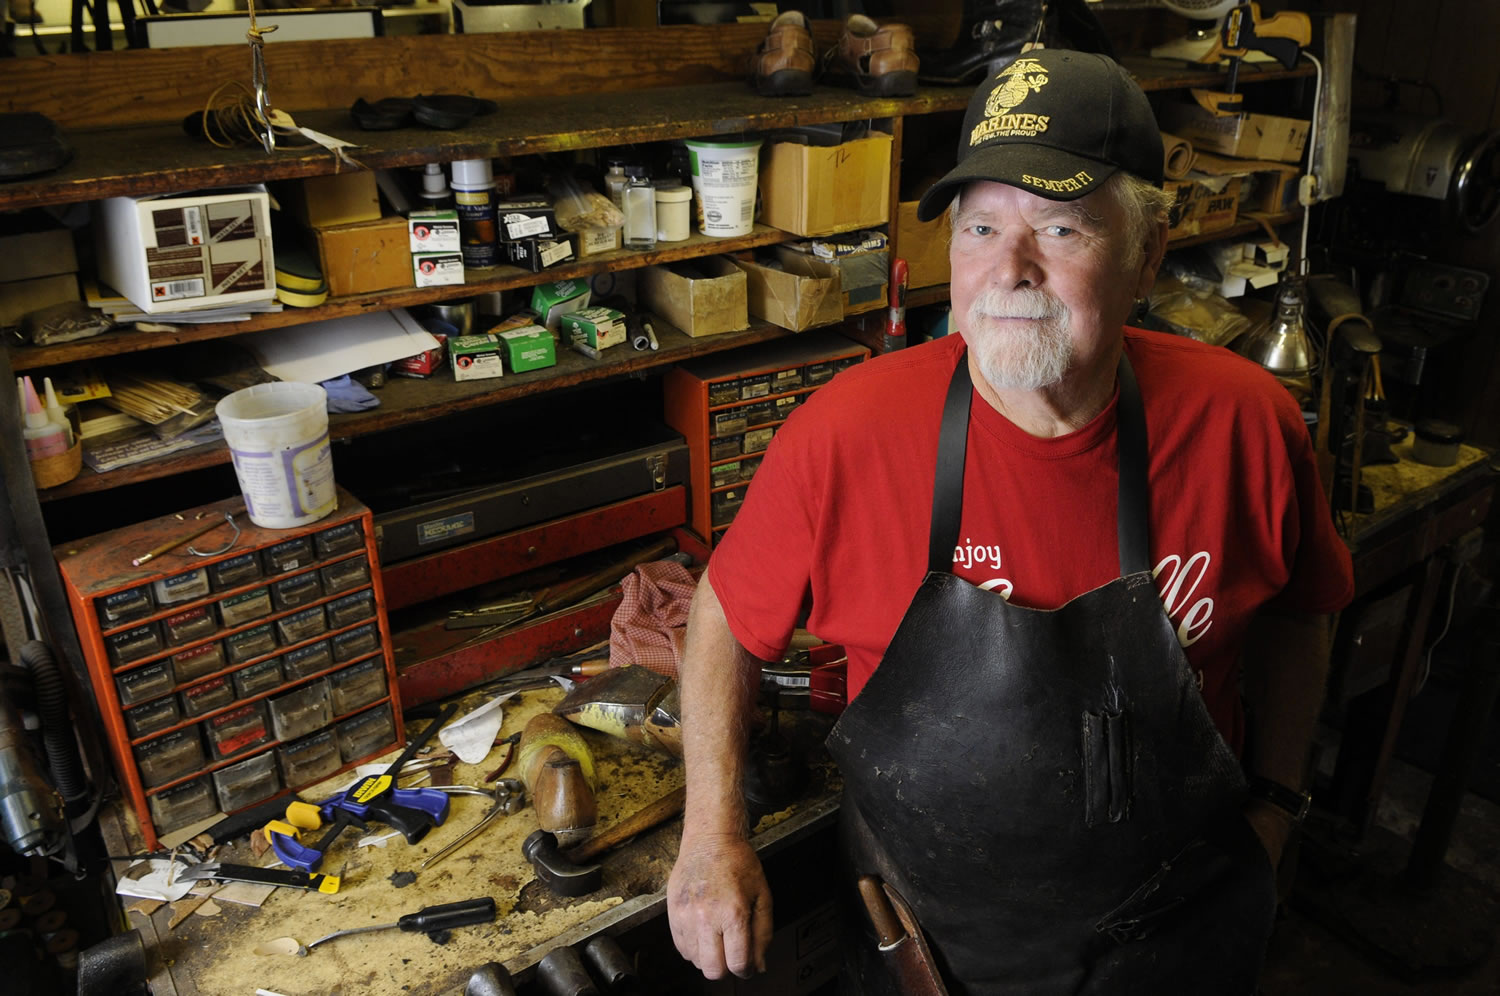 U.S. Marine Corps veteran, Bill Marino, who served in Vietnam, is photographed at Marino's Boots and Saddles in Coquille, Ore., on Aug. 21, 2015. He is a member of the Marine Corps League Coquille River Detachment 1042.